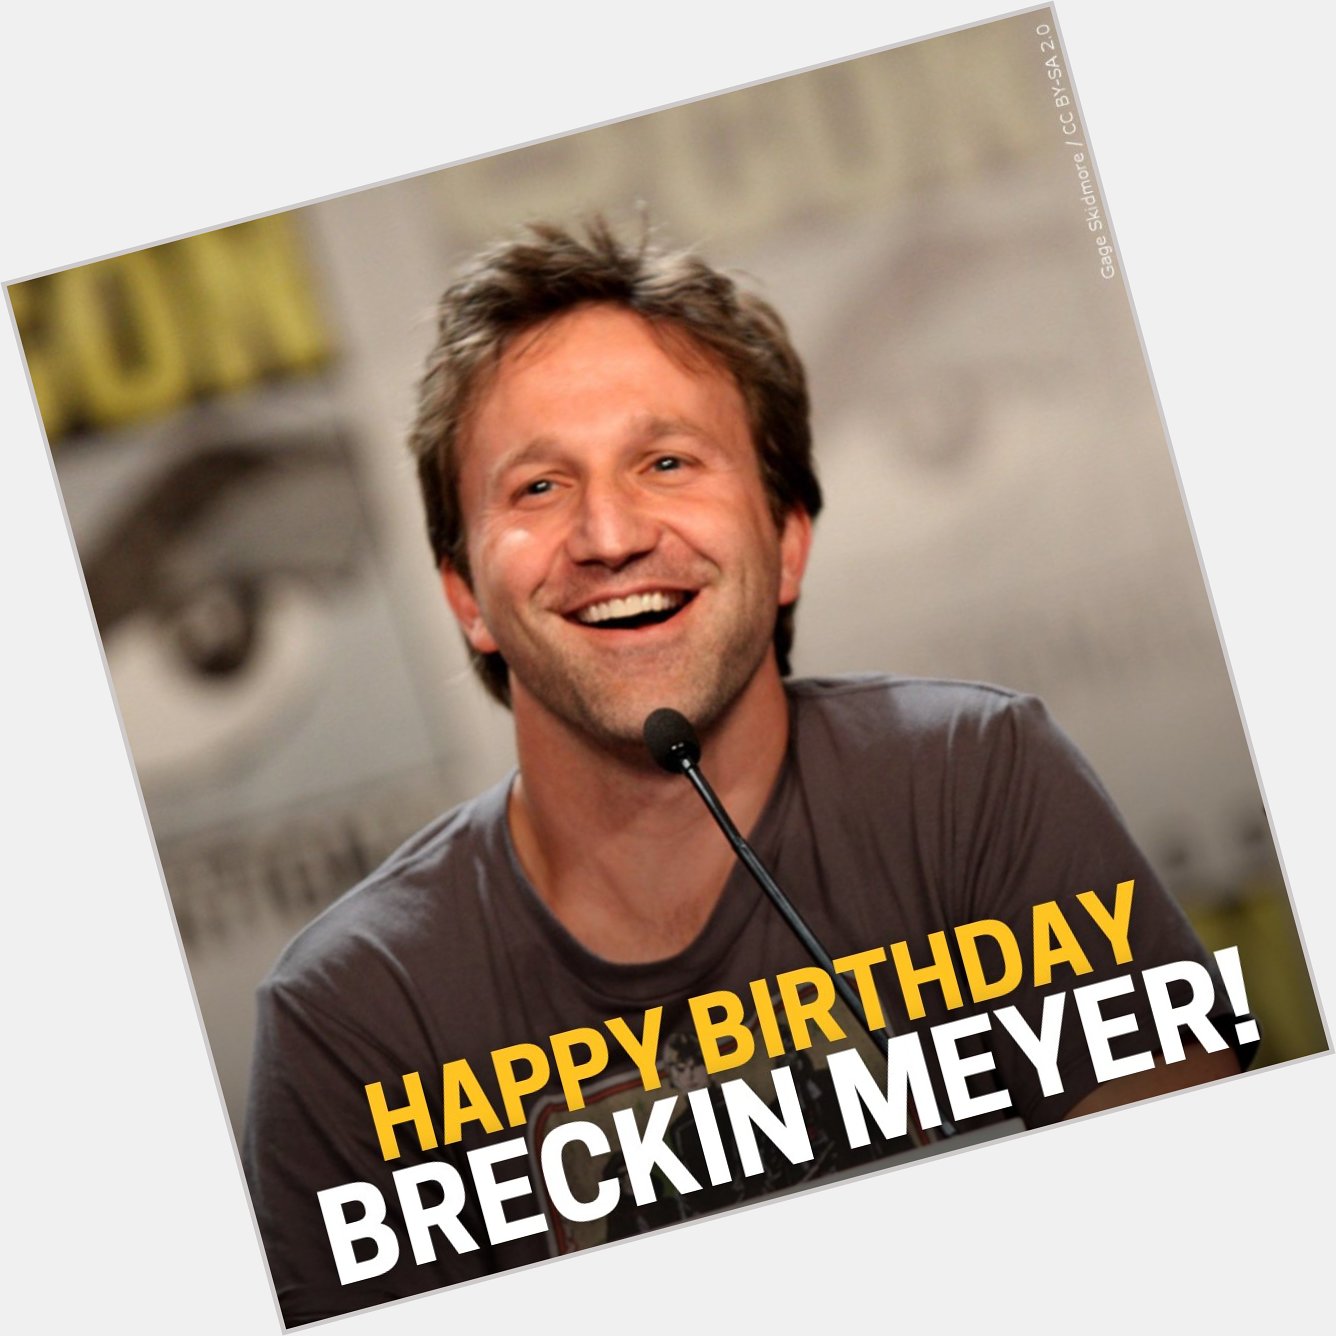 Join us in wishing actor Breckin Meyer a happy birthday! 